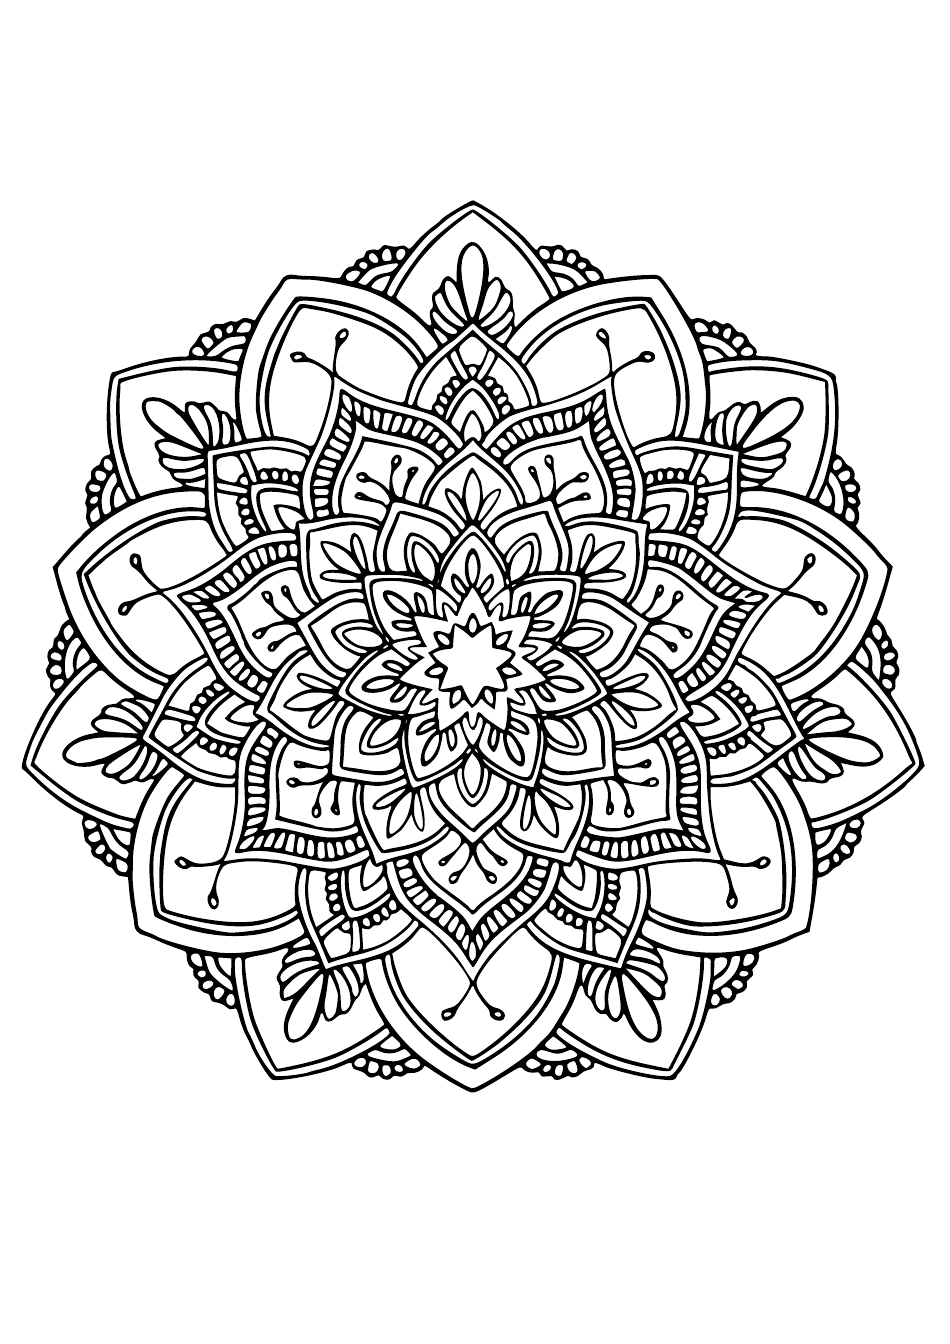 Blooming Flower Ornament Coloring Page